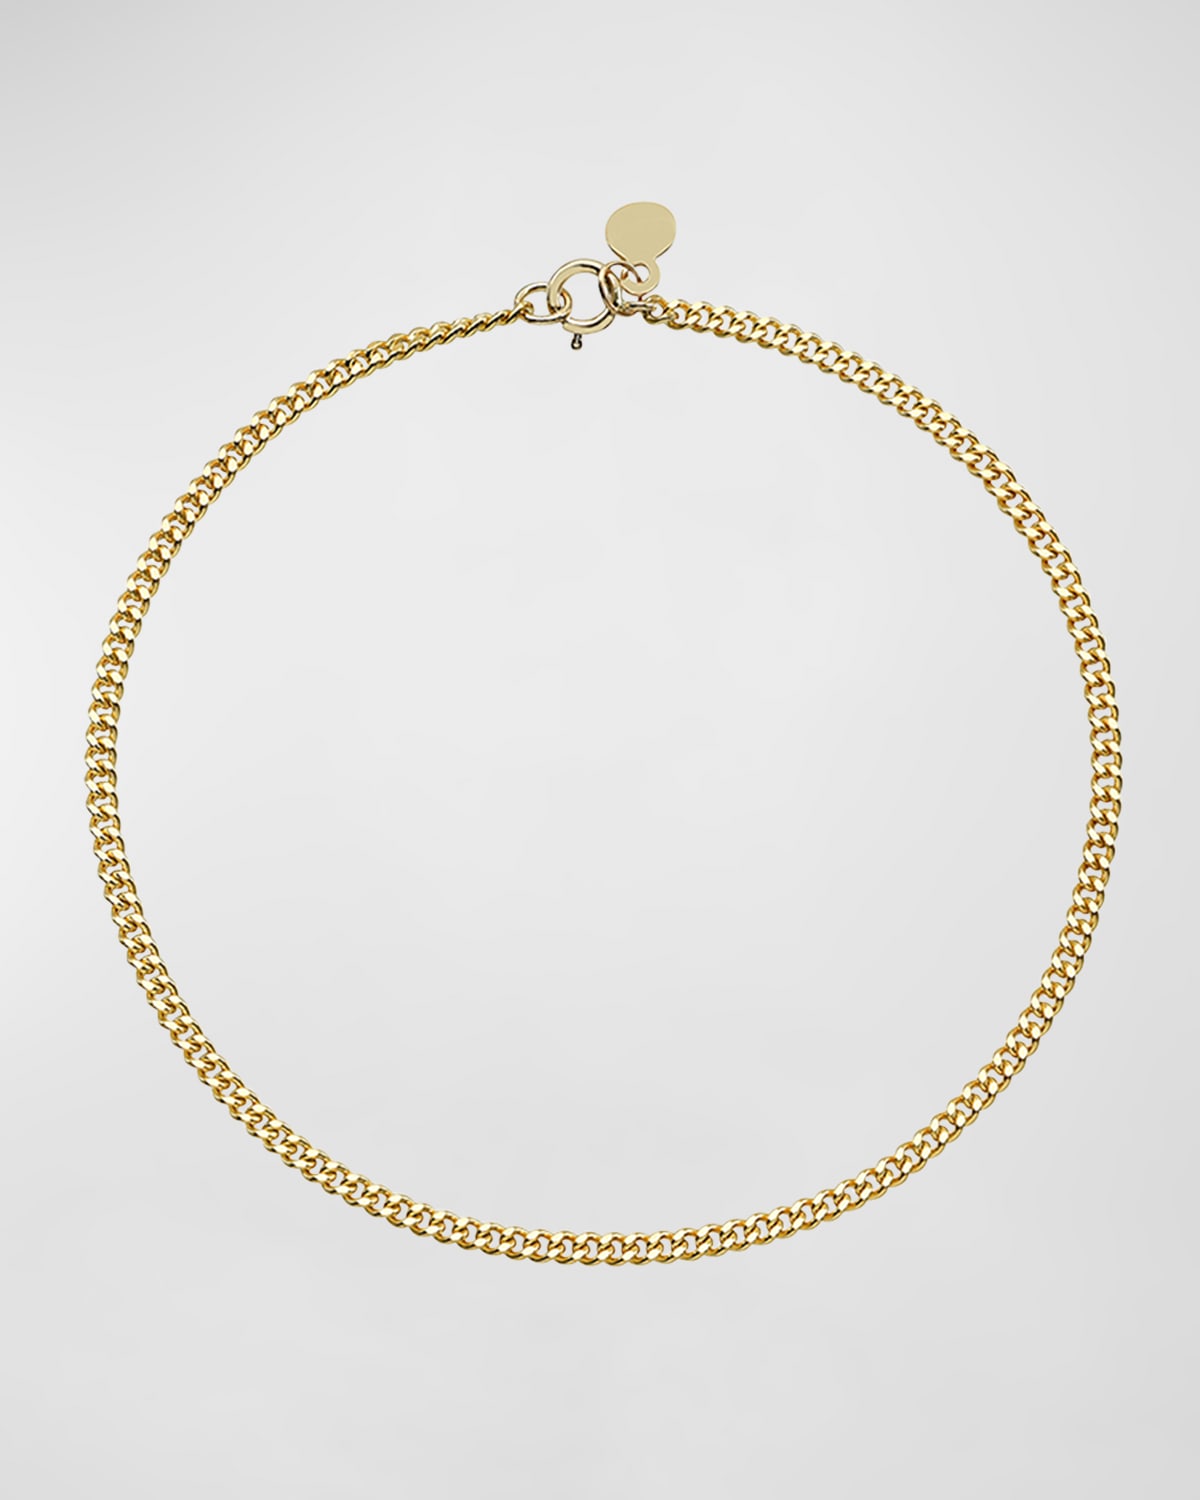 14K Gold Small Curb Link Chain Bracelet